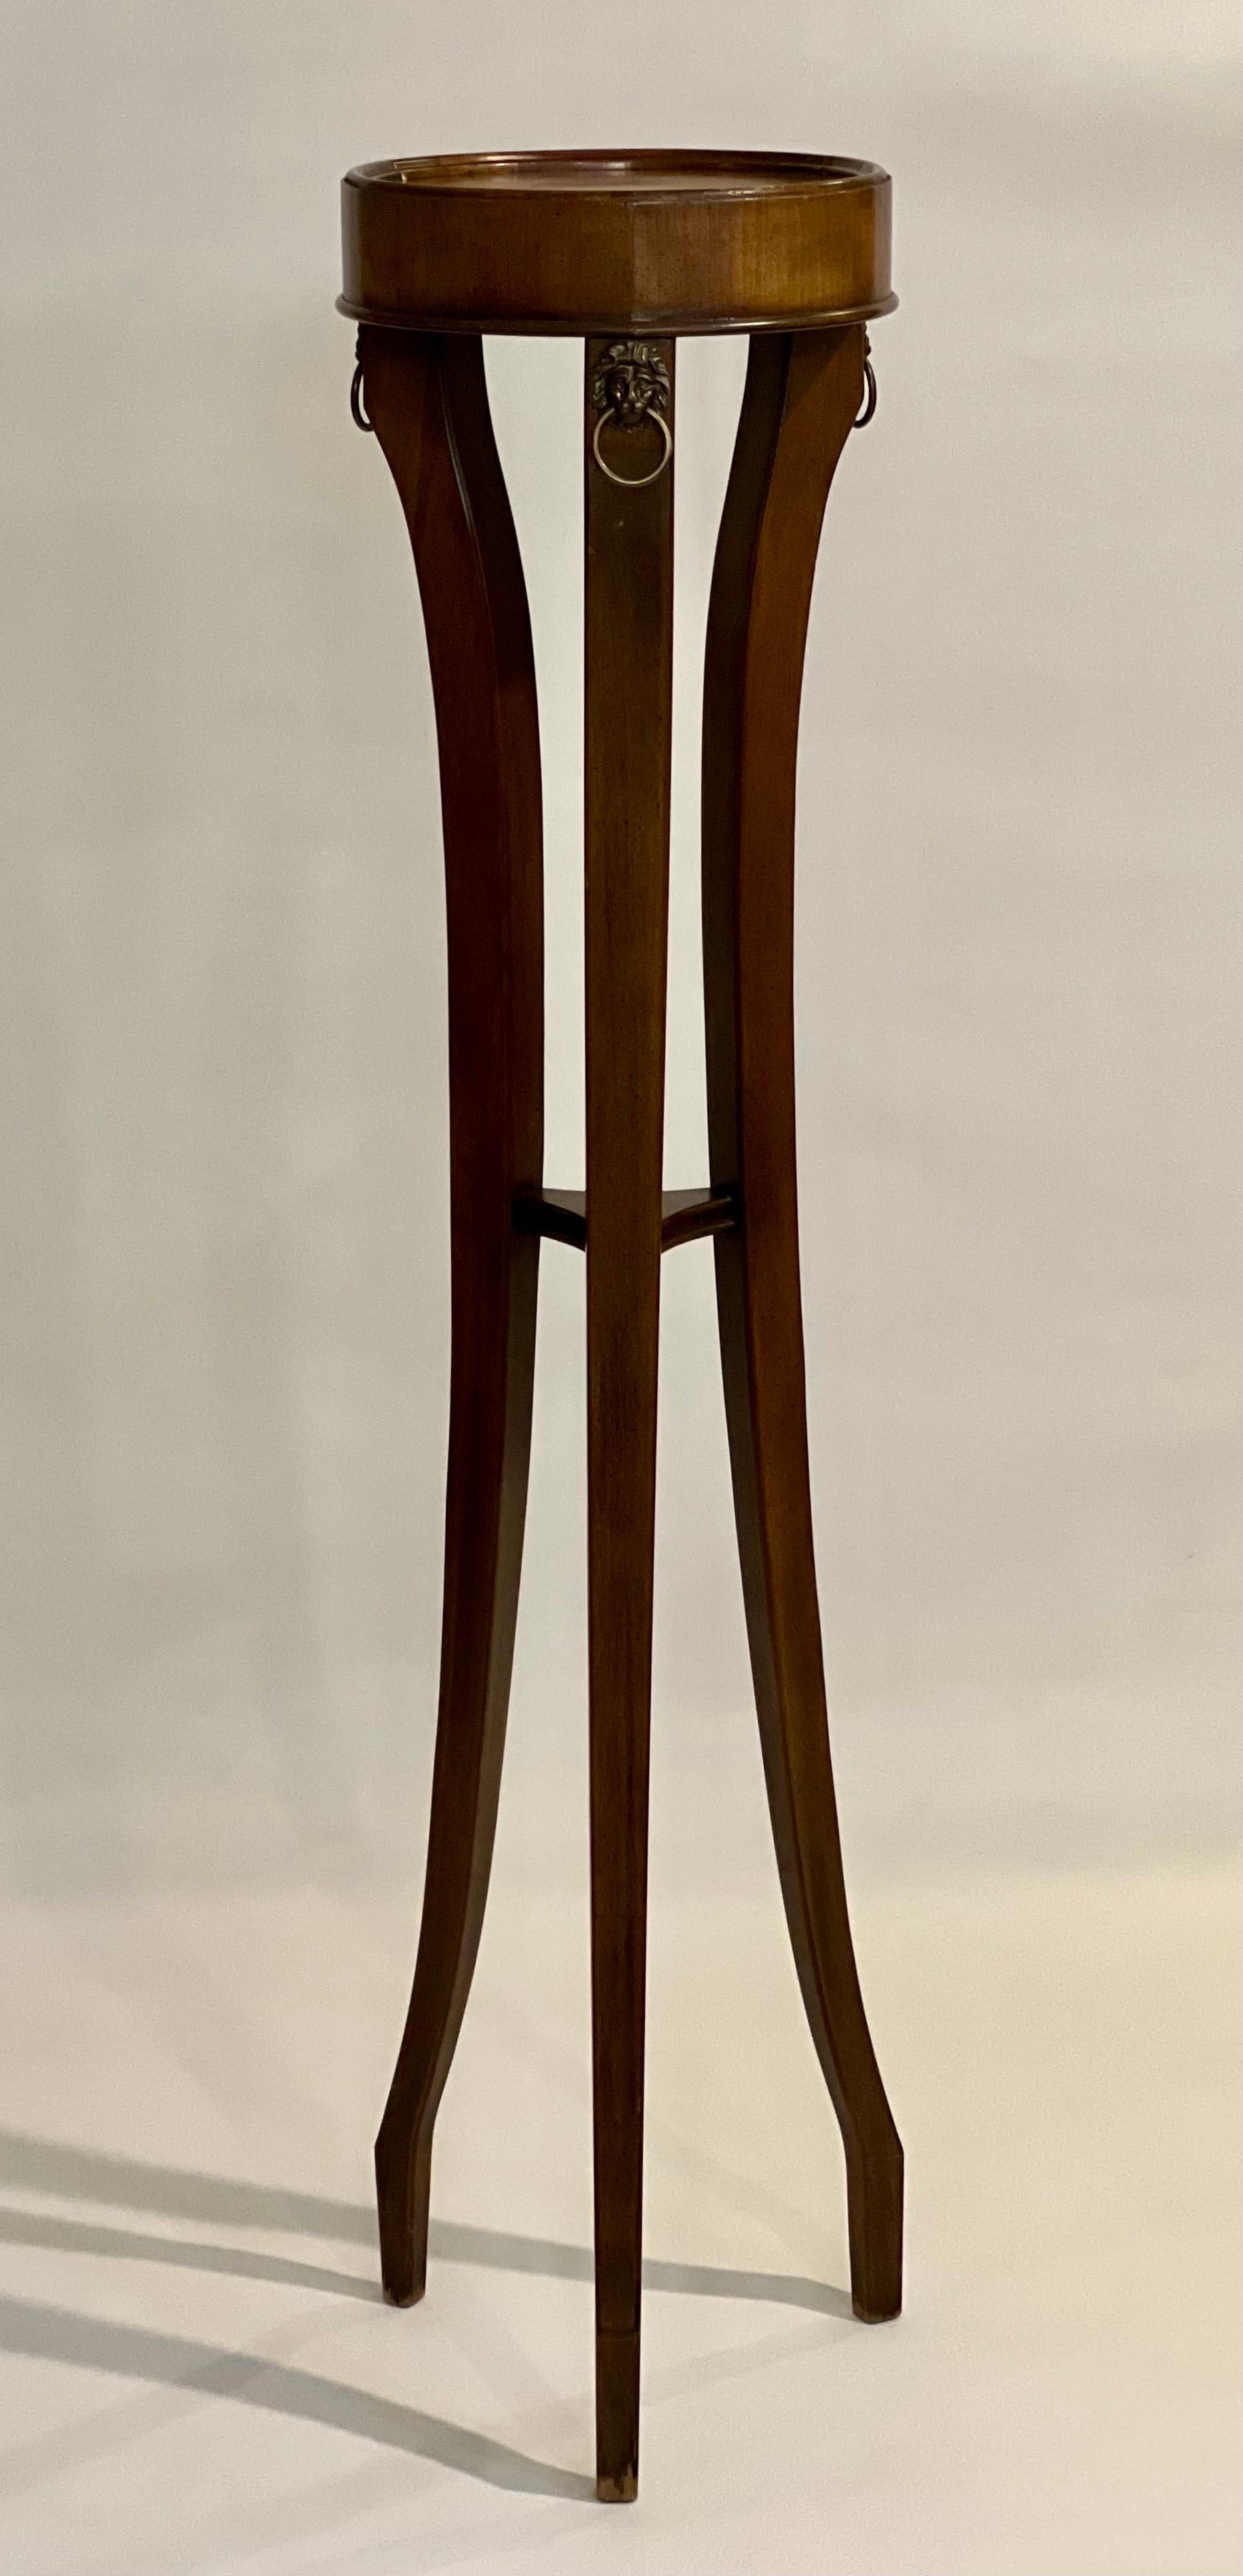 Tall and elegant Regency style walnut sculpture or plant stand, c. 1980.

Stand has a small in-curving lower shelf joined by three shaped legs and brass rings with lion motif at the top. The circular top has a nicely finished, raised rounded edge